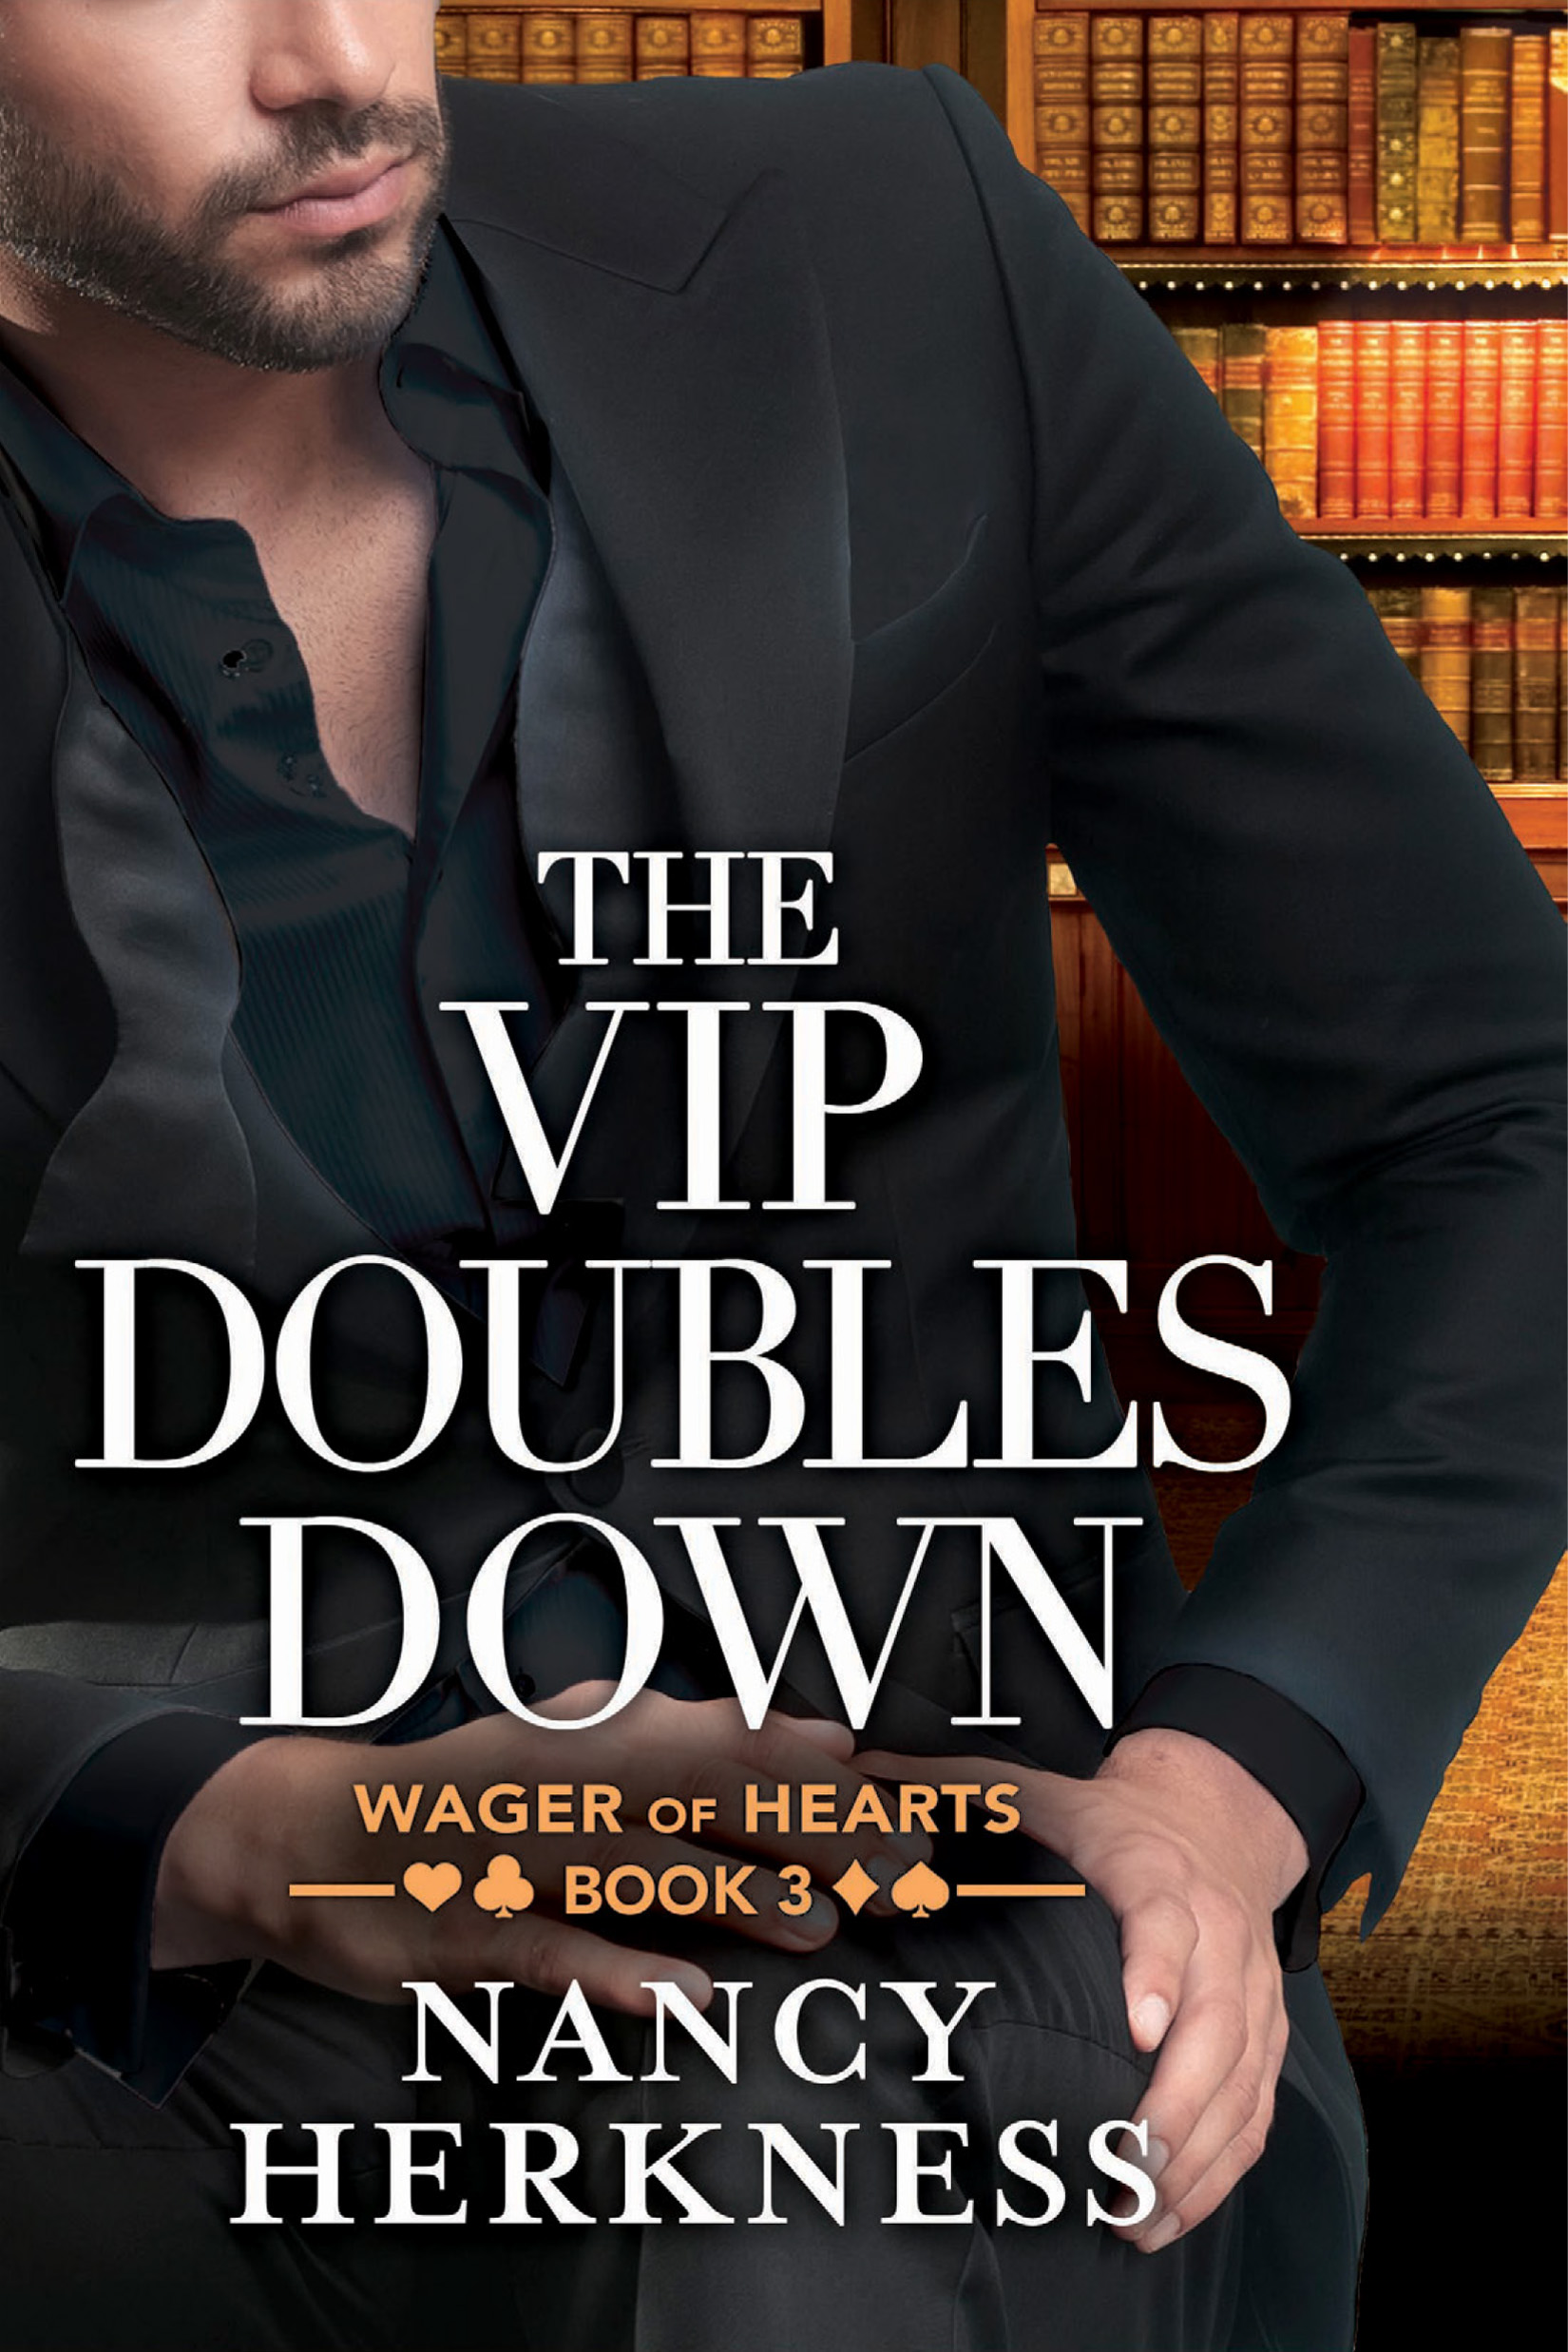 The VIP Doubles Down